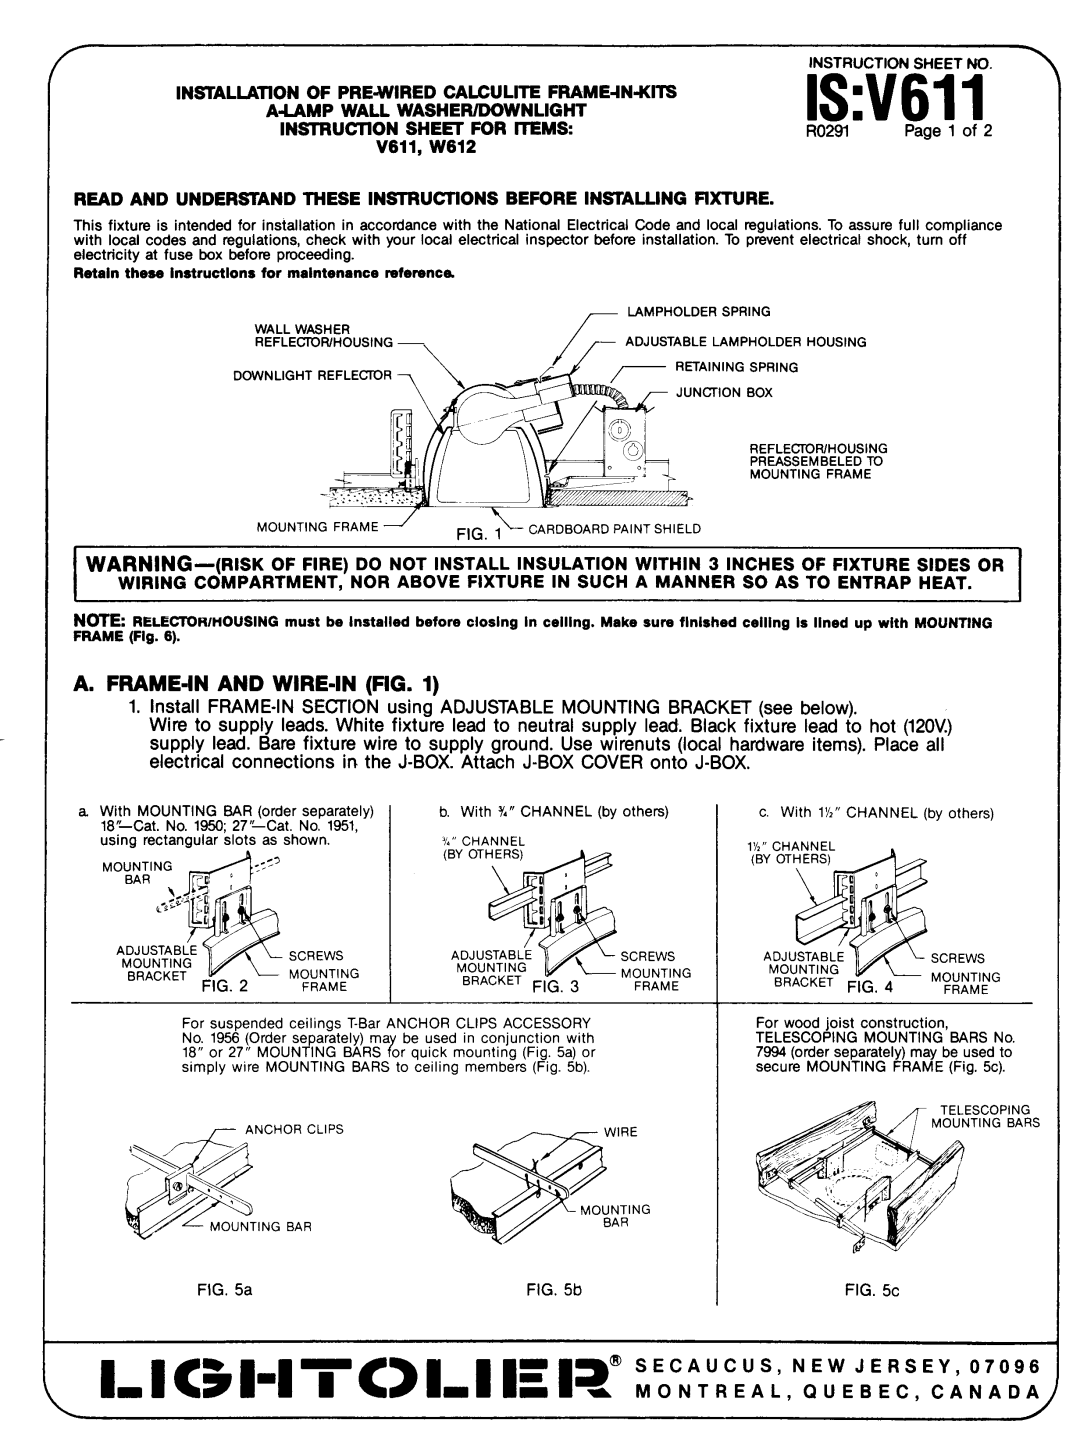 Lightolier V611 instruction sheet A.Frame-Inand Wire-Infig, Is, A-Lampwall Washeridownlight, Instruction She~ For Items 